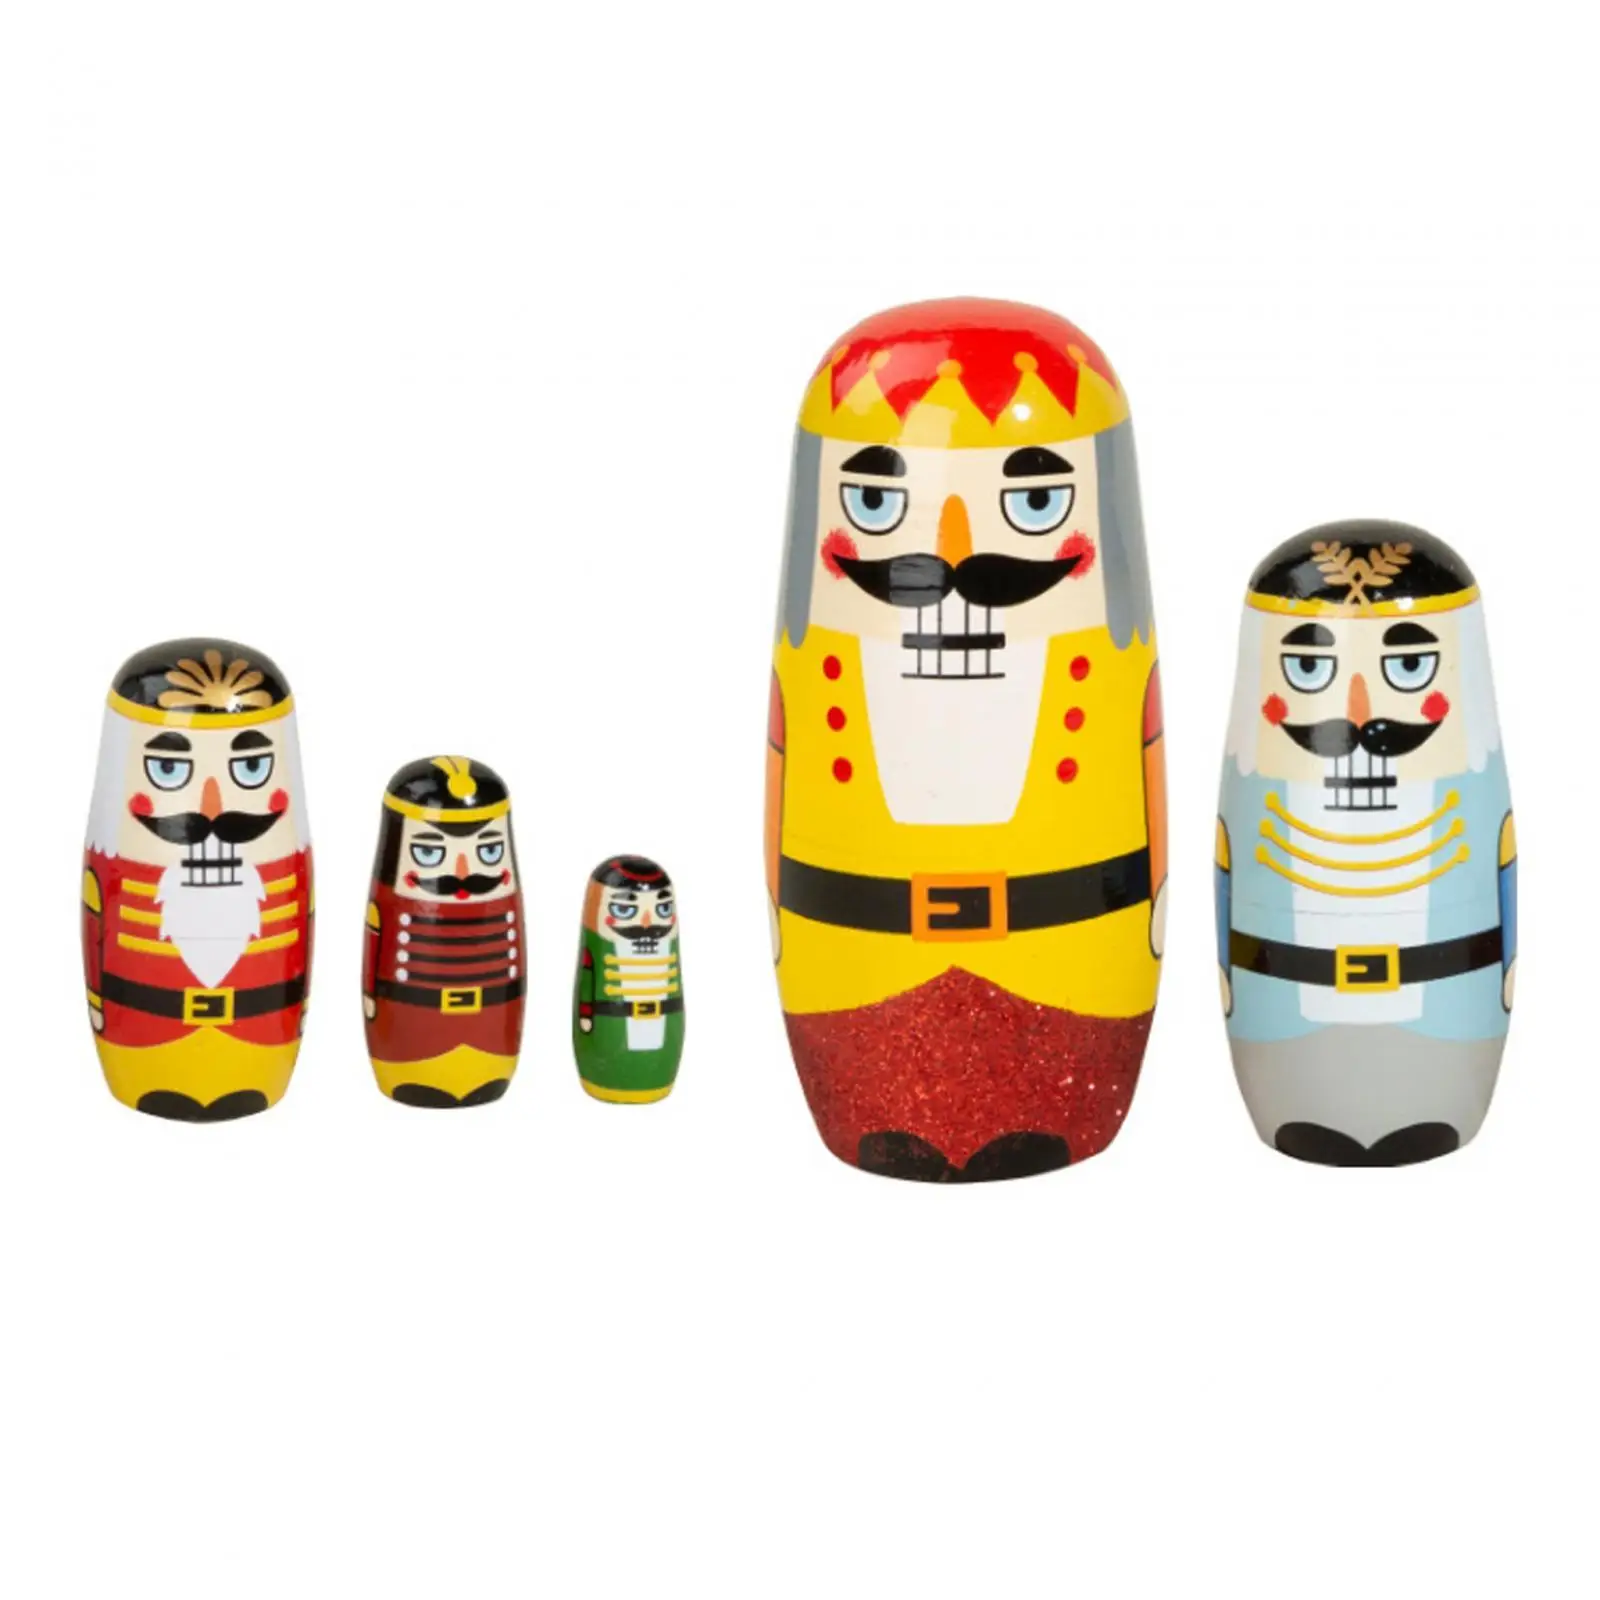 5 Pieces Nutcracker Russian Soldiers Desktop Decor Collectible New Year Holiday Gift Matryoshka Russian Nesting Dolls Decor